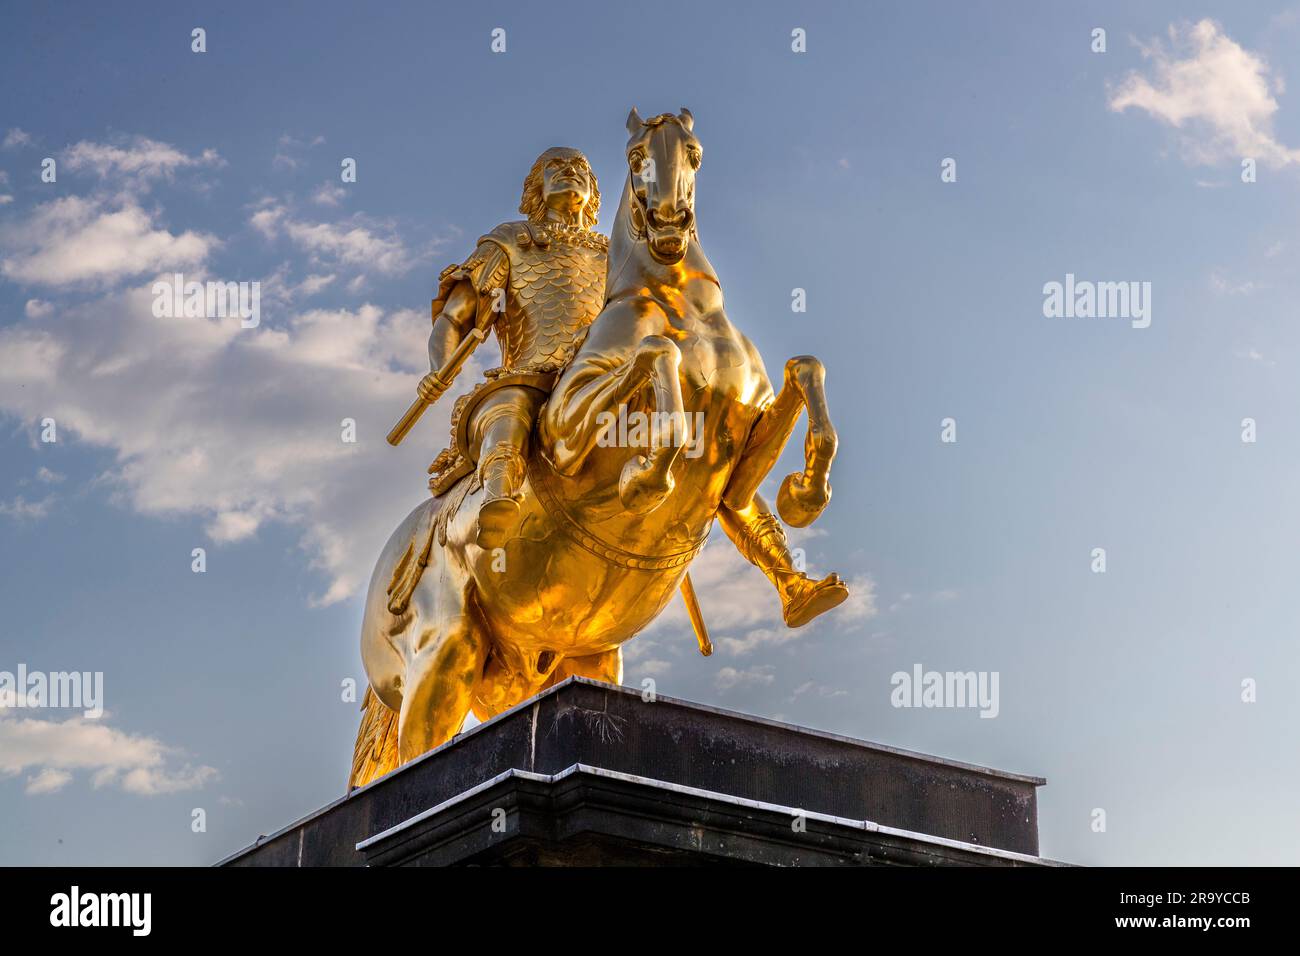 Golden Horseman, August the Strong on horseback, King of Poland, Grand Duke of Lithuania, Elector of Saxony (1670-1733), the statue made of real gold leaf is repeatedly subjected to vandalism attacks. The golden rider is an equestrian statue on the Neustädter Markt in Dresden, Germany. The depicted Saxon Elector and Polish King August the Strong also adorns the Dresden Christmas Stollen as a seal of quality Stock Photo